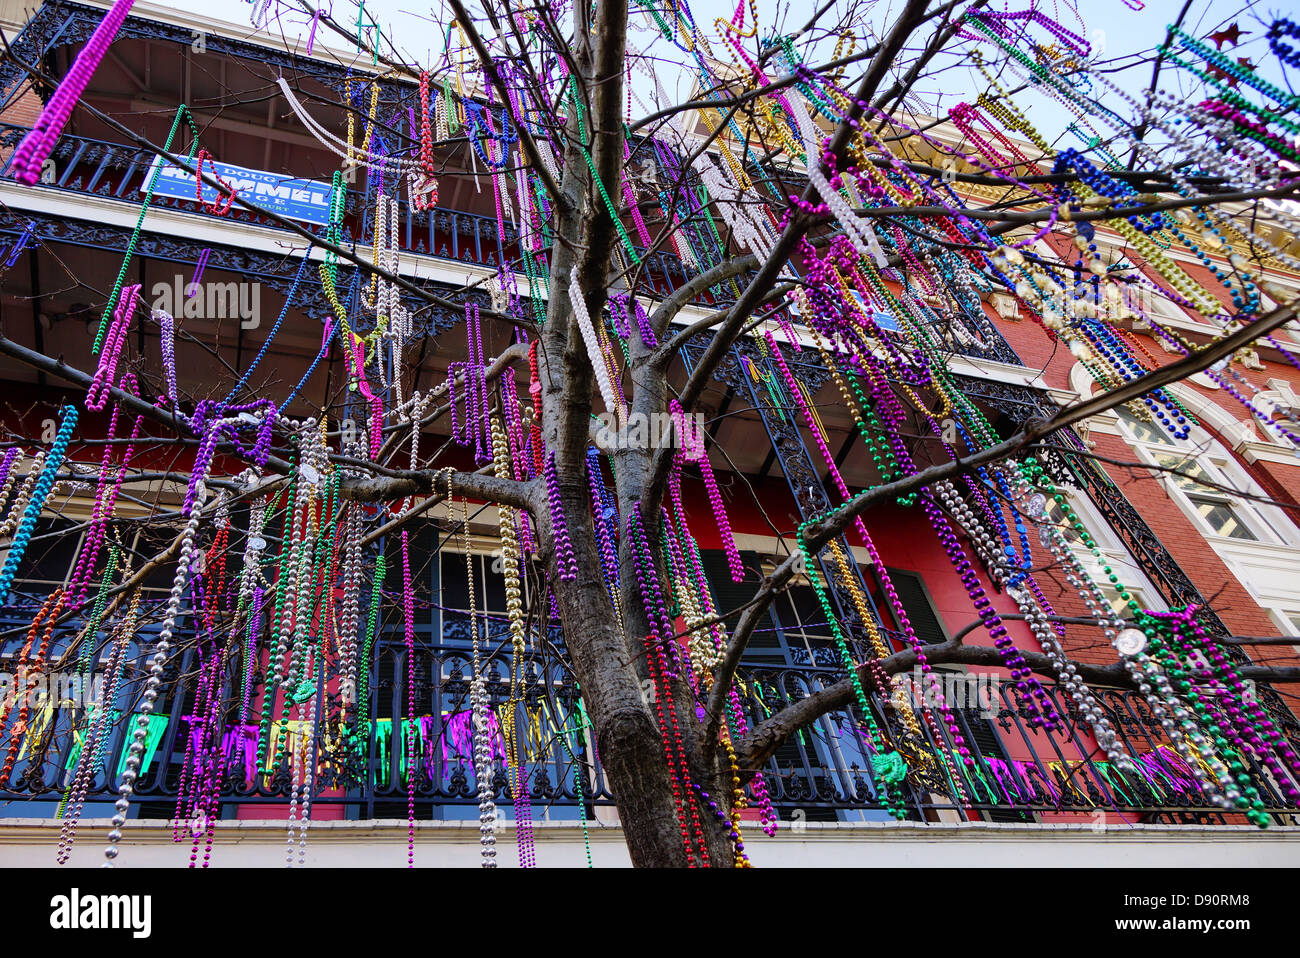 Mardi Gras Decorations In New Orleans Stock Photo - Download Image Now -  Mardi Gras, New Orleans Mardi Gras, New Orleans - iStock